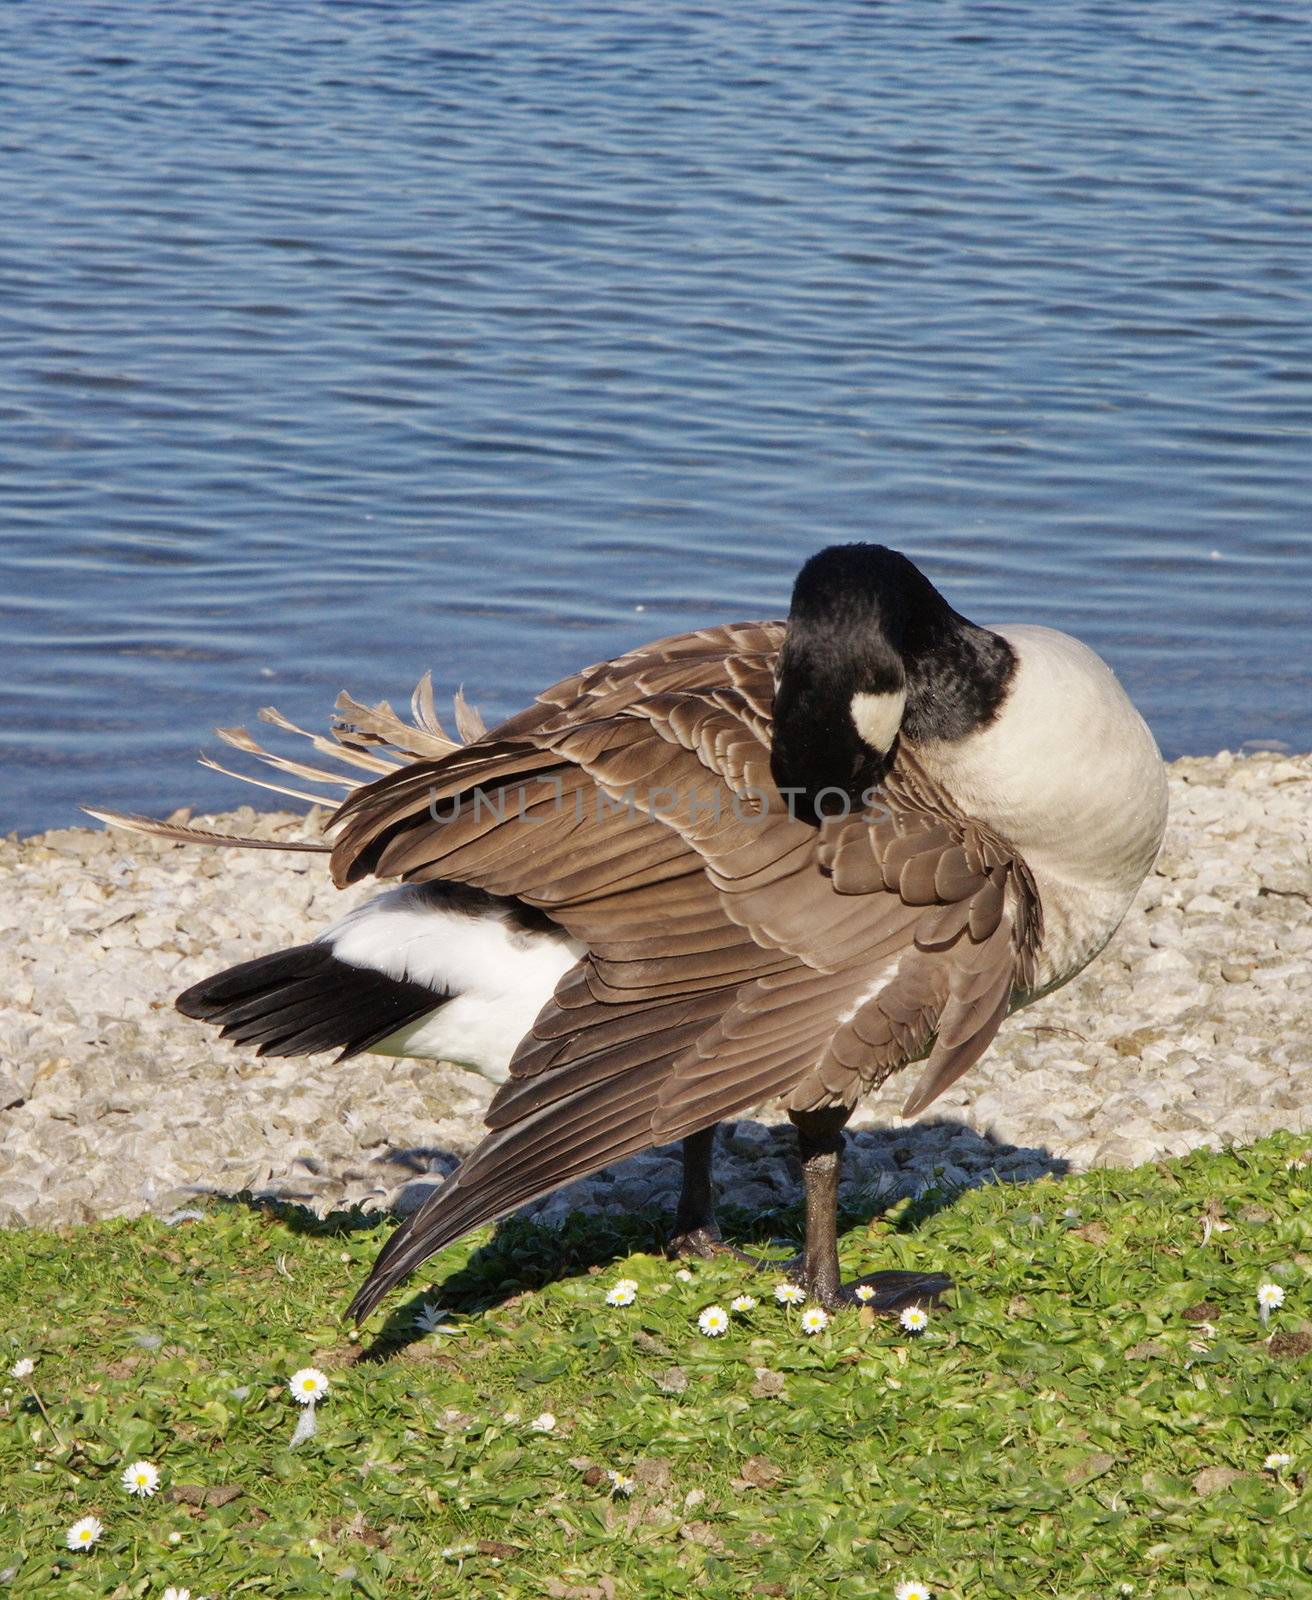 Canadian goose preening itself at the side of a lake